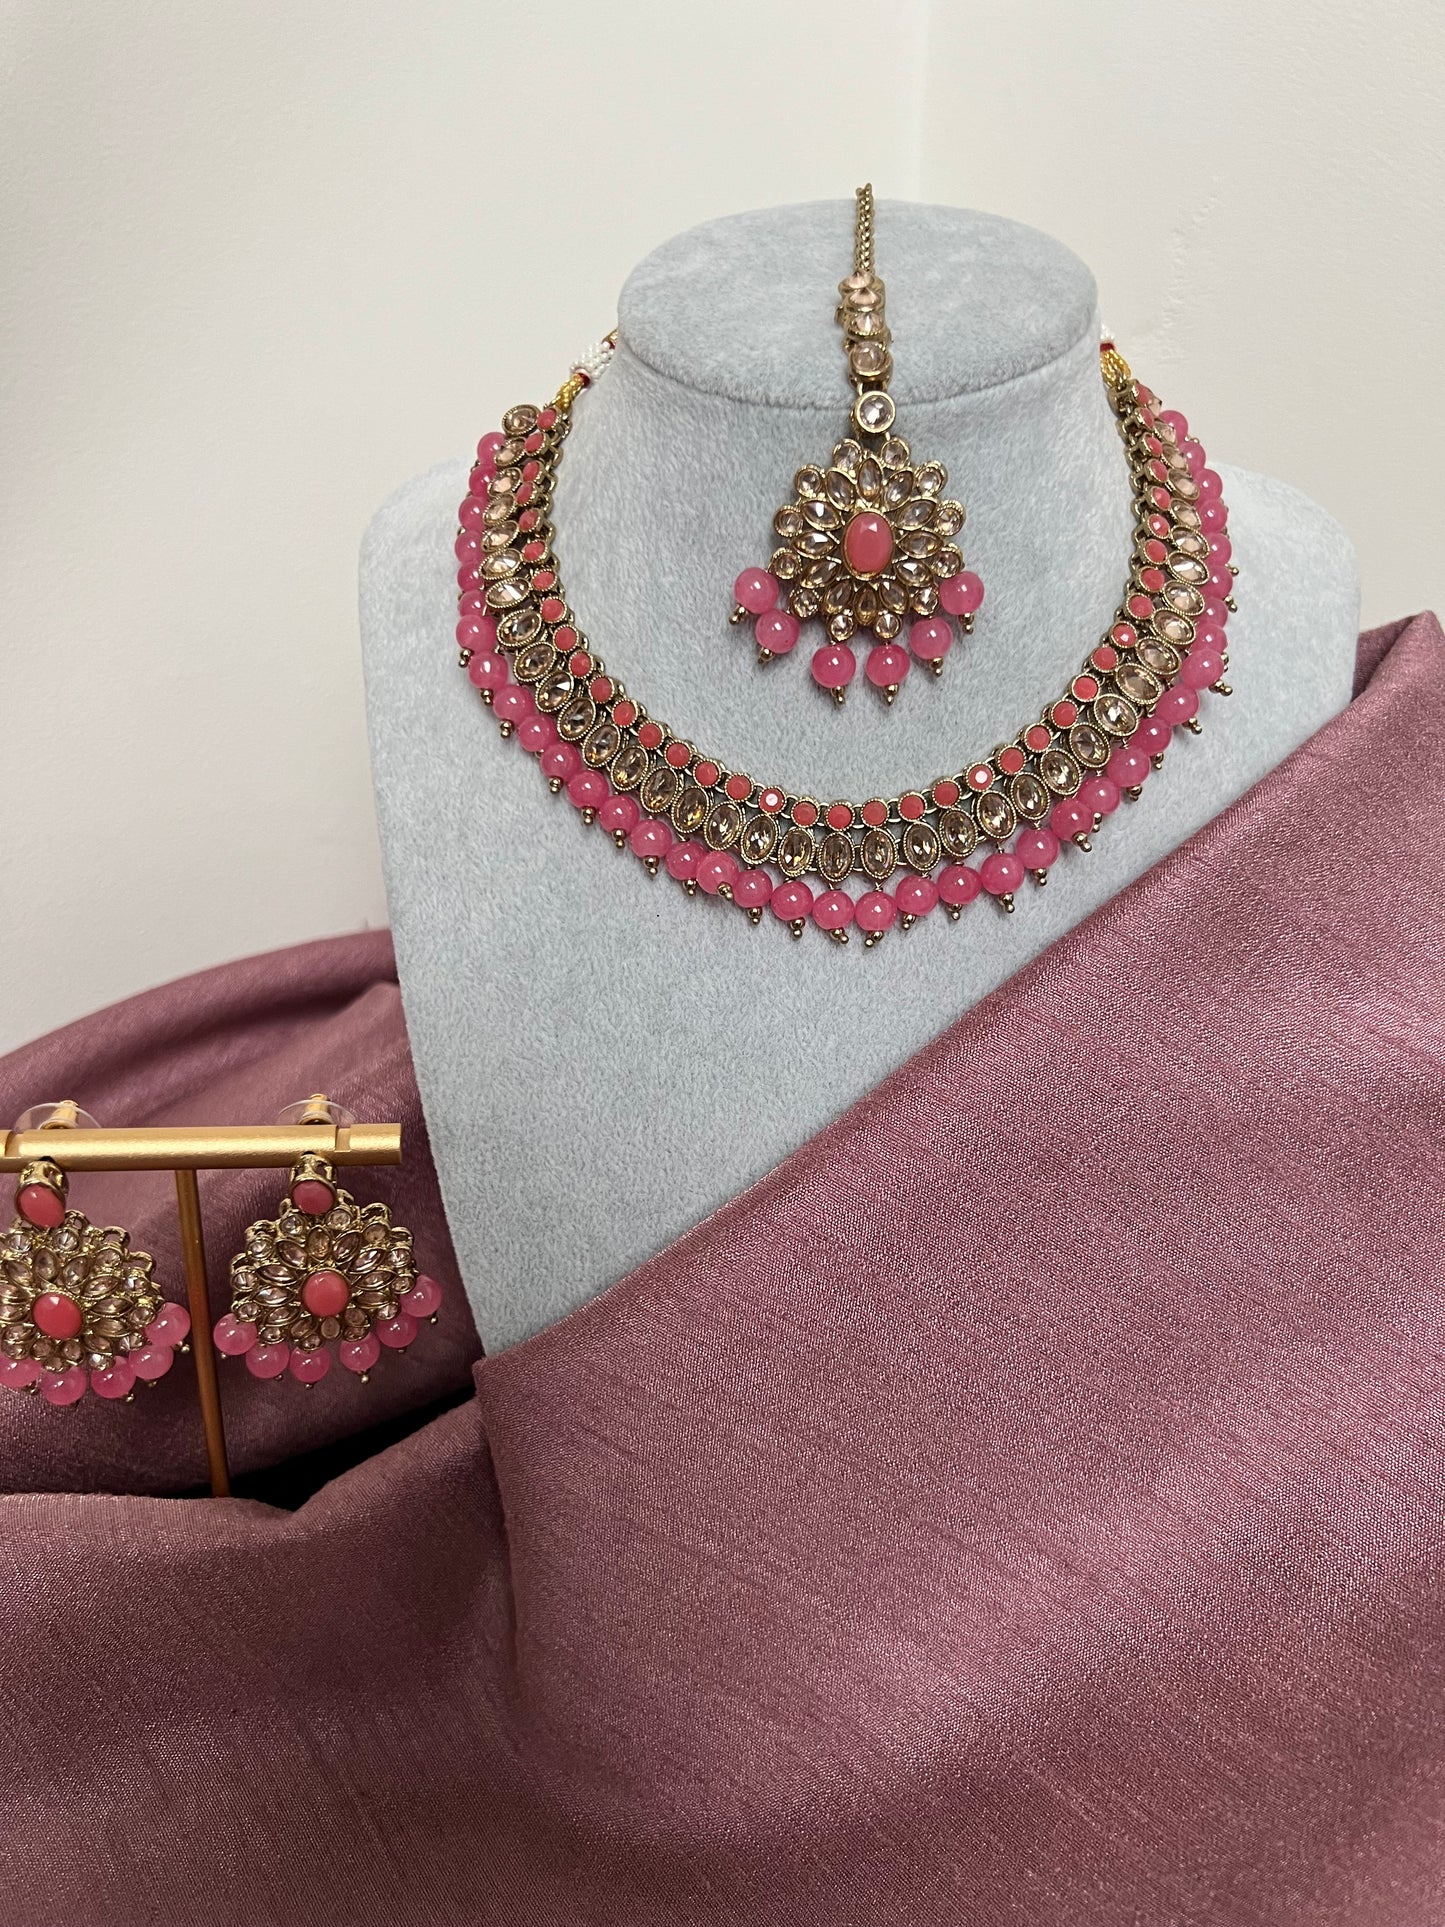 Pink mehndi necklace with matching earrings